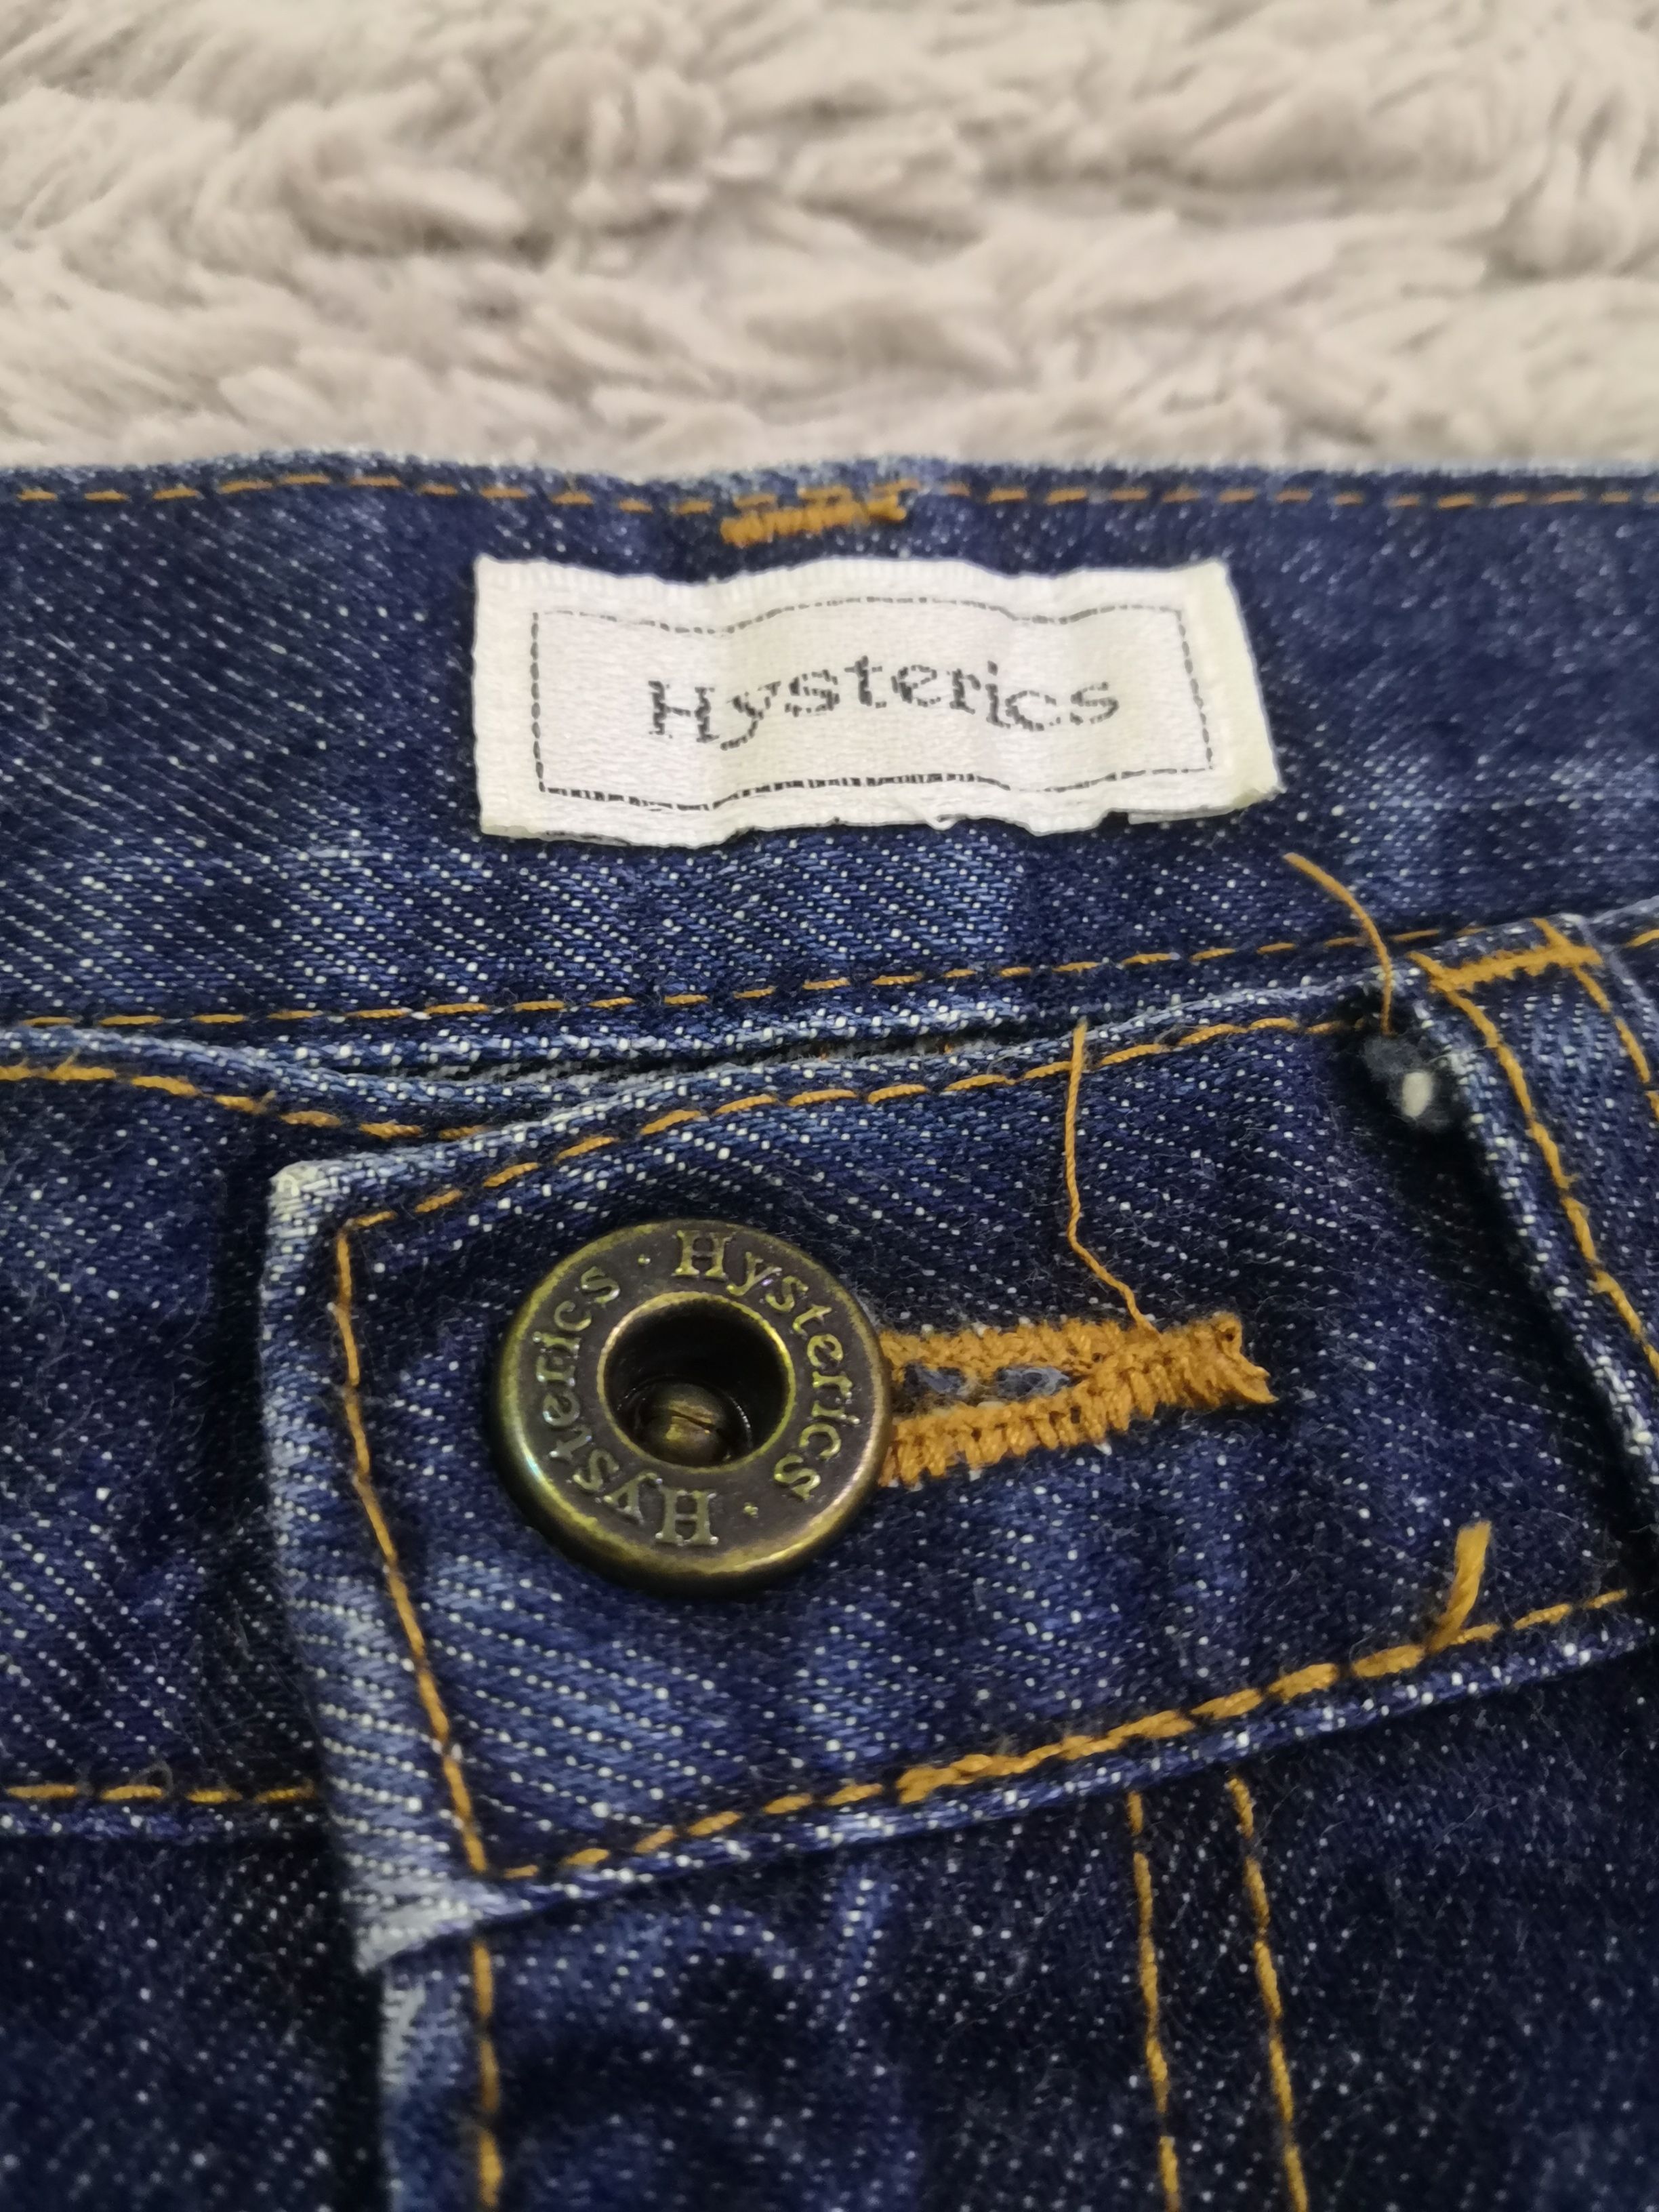 Vintage Hysteric Glamour Low Rise Jeans - 5